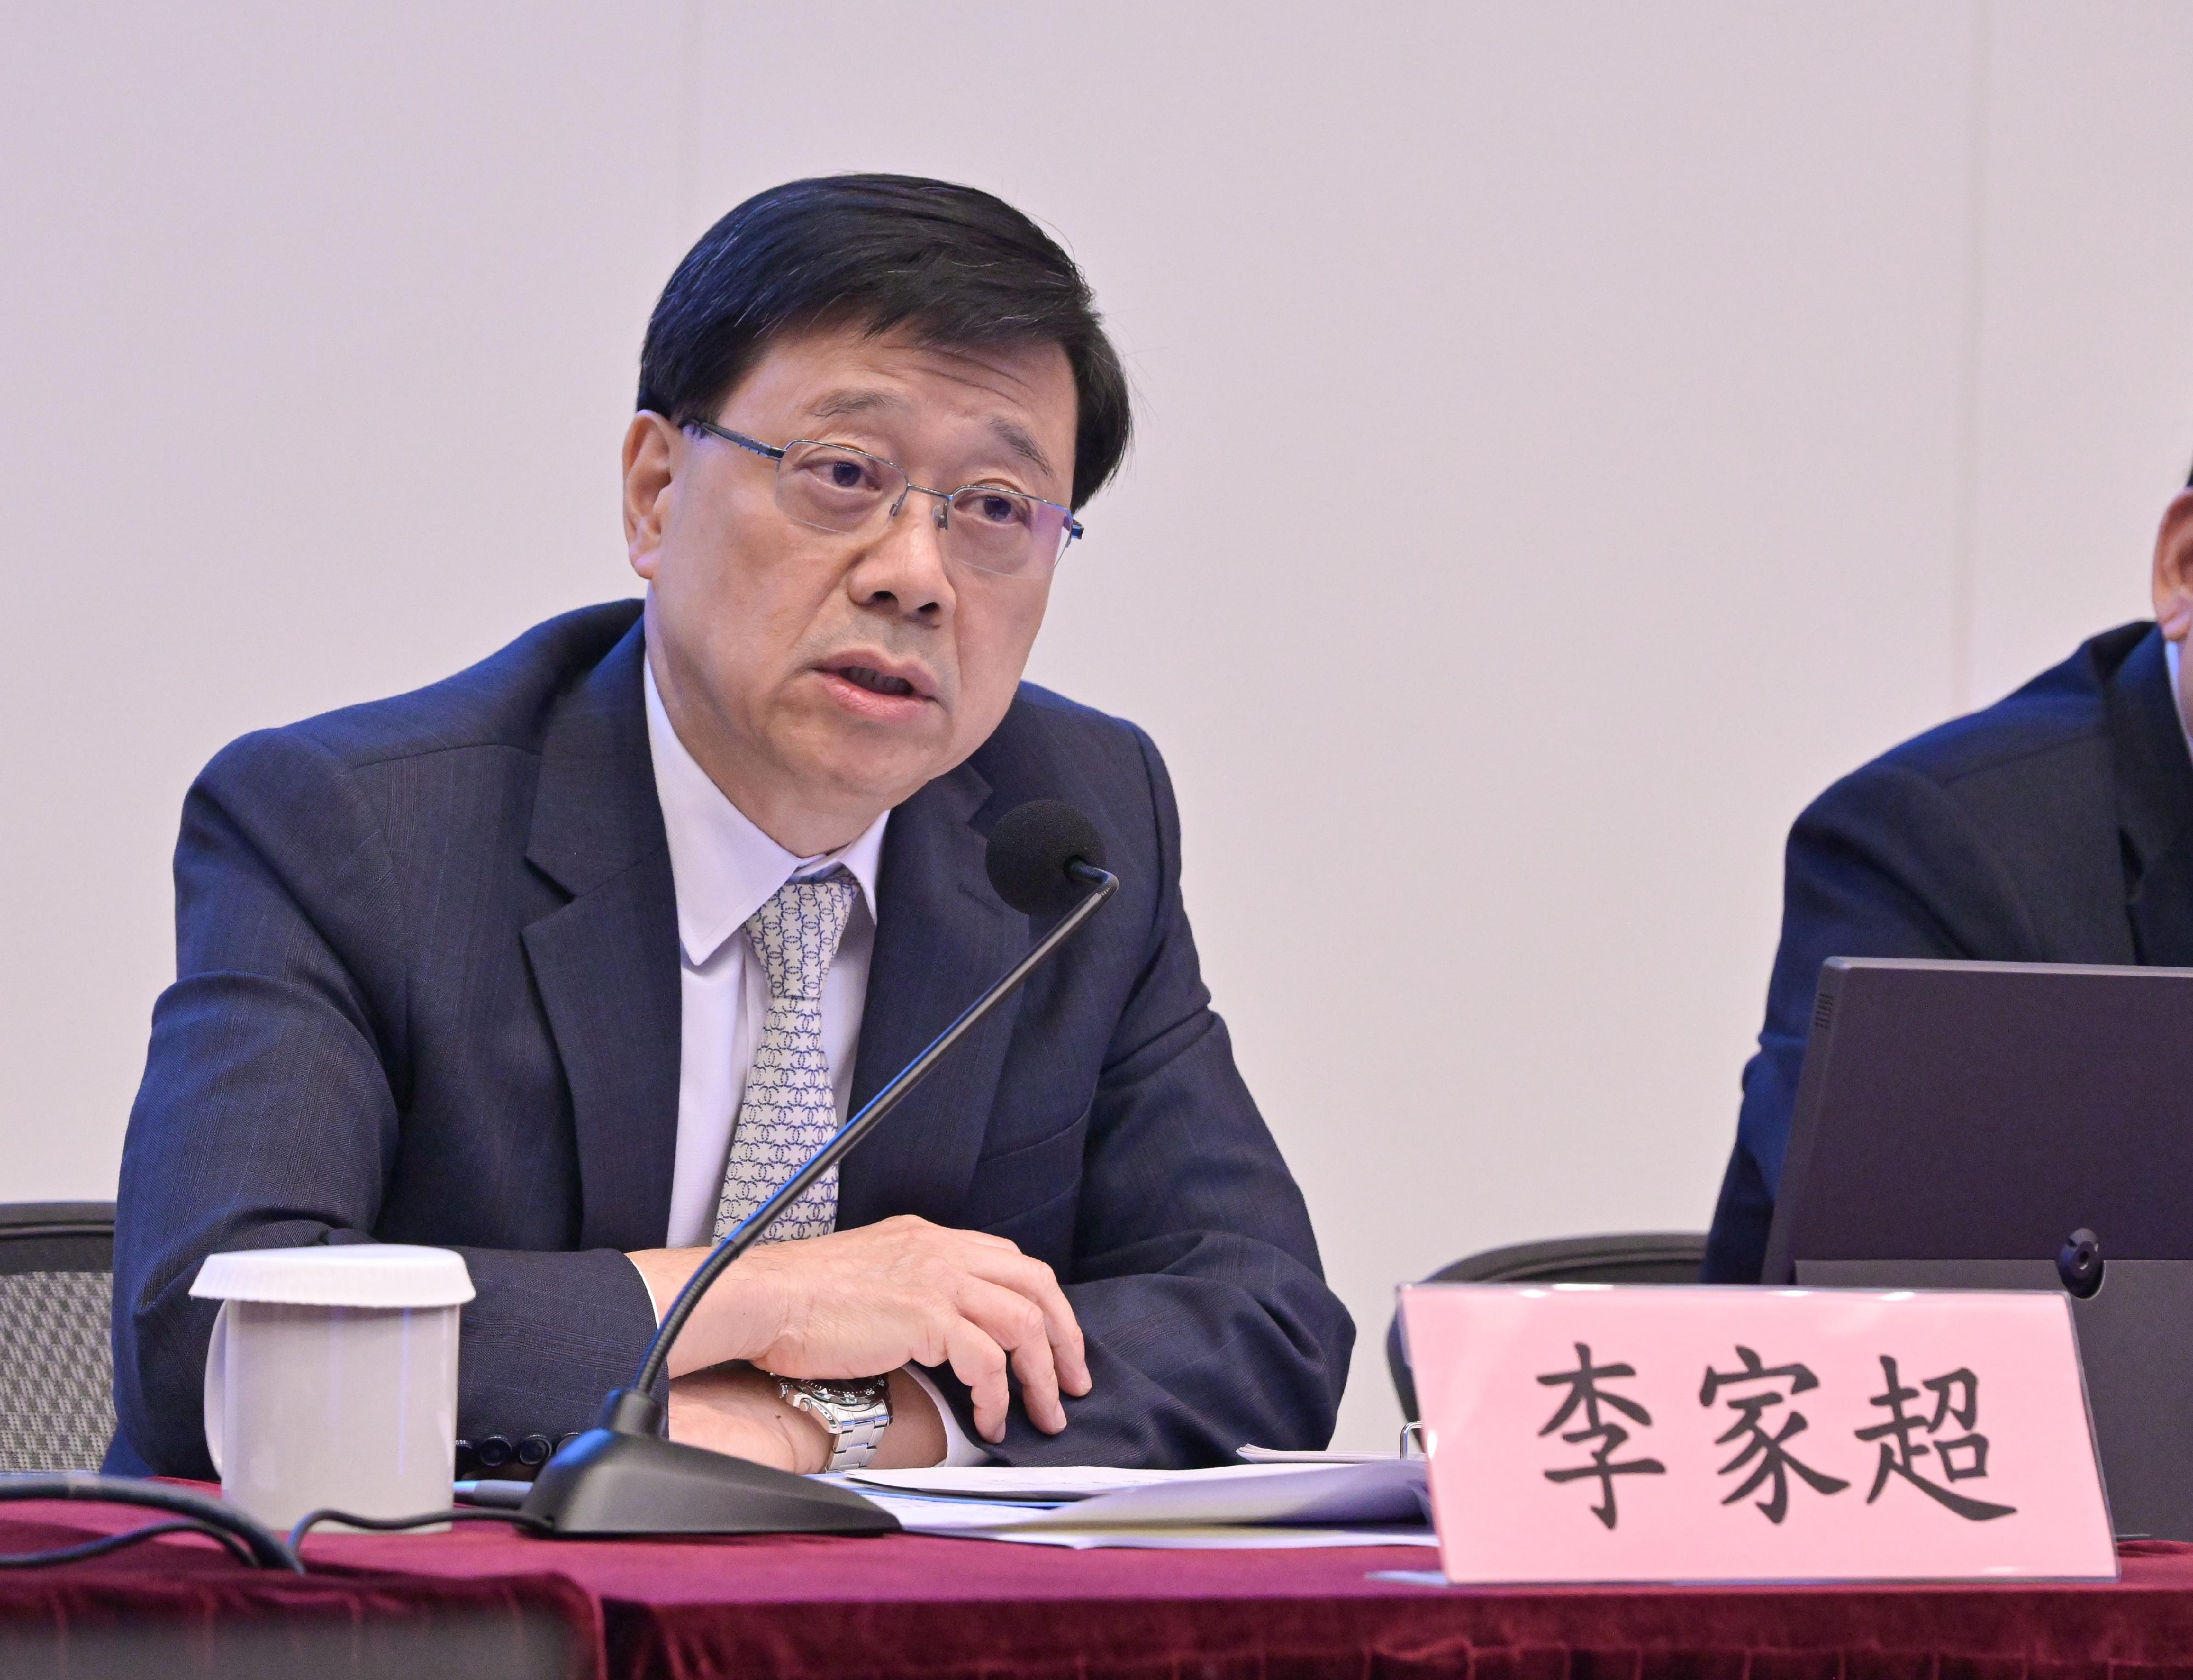 The Hong Kong Special Administrative Region Government today (April 9) held a seminar on learning the spirit of the "two sessions" at the Central Government Offices. Photo shows the Chief Executive, Mr John Lee, speaking at the seminar.
